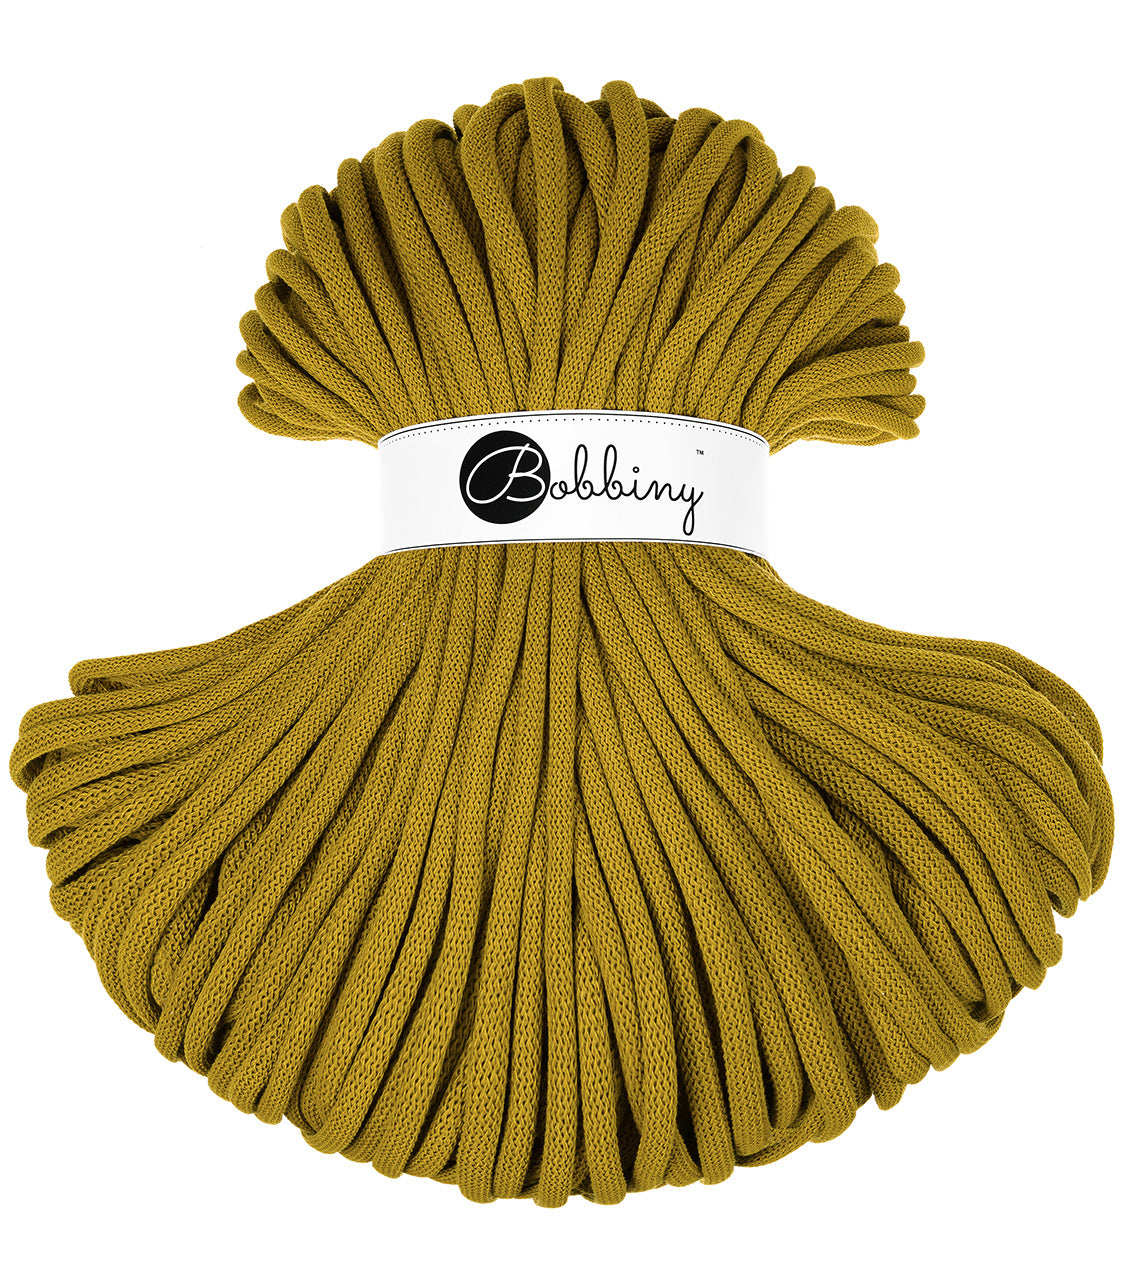 Bobbiny braided cord 9mm in spicy yellow shade 